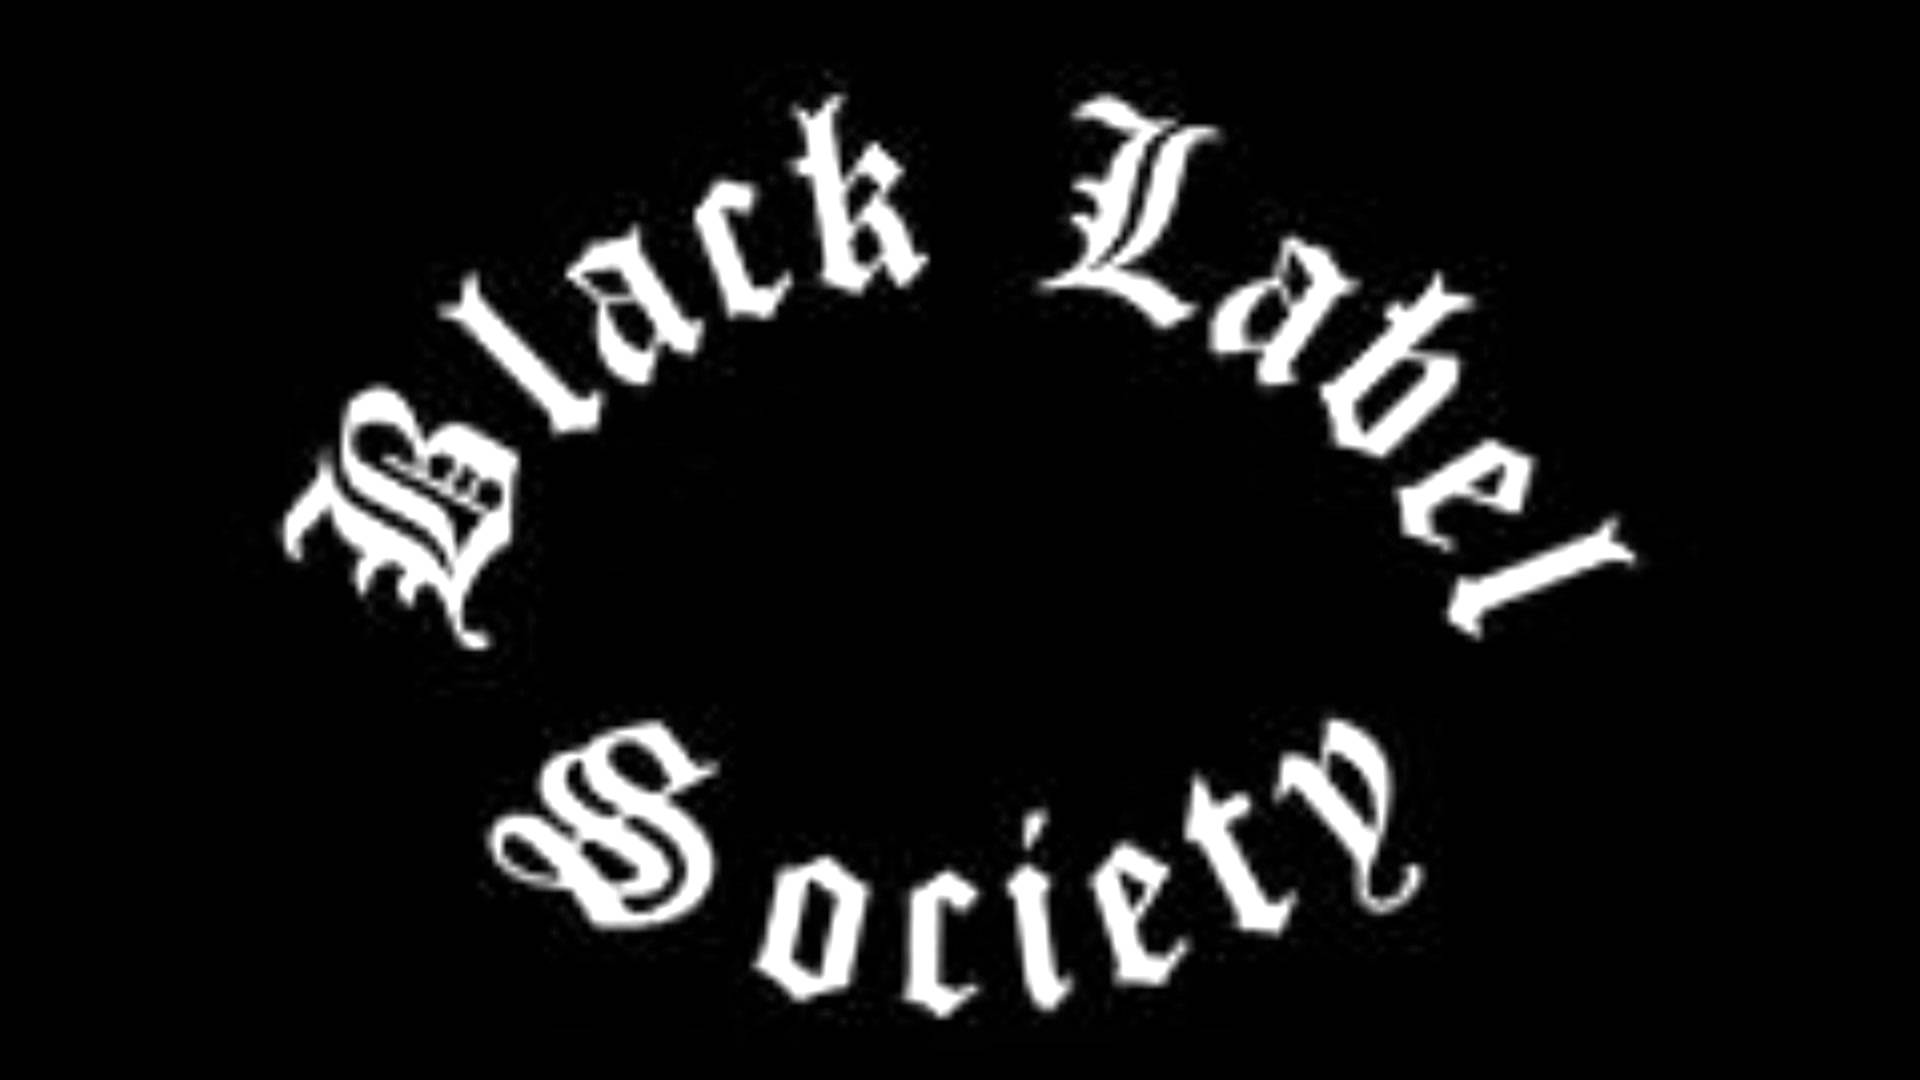 Black Label Society Years of Grief